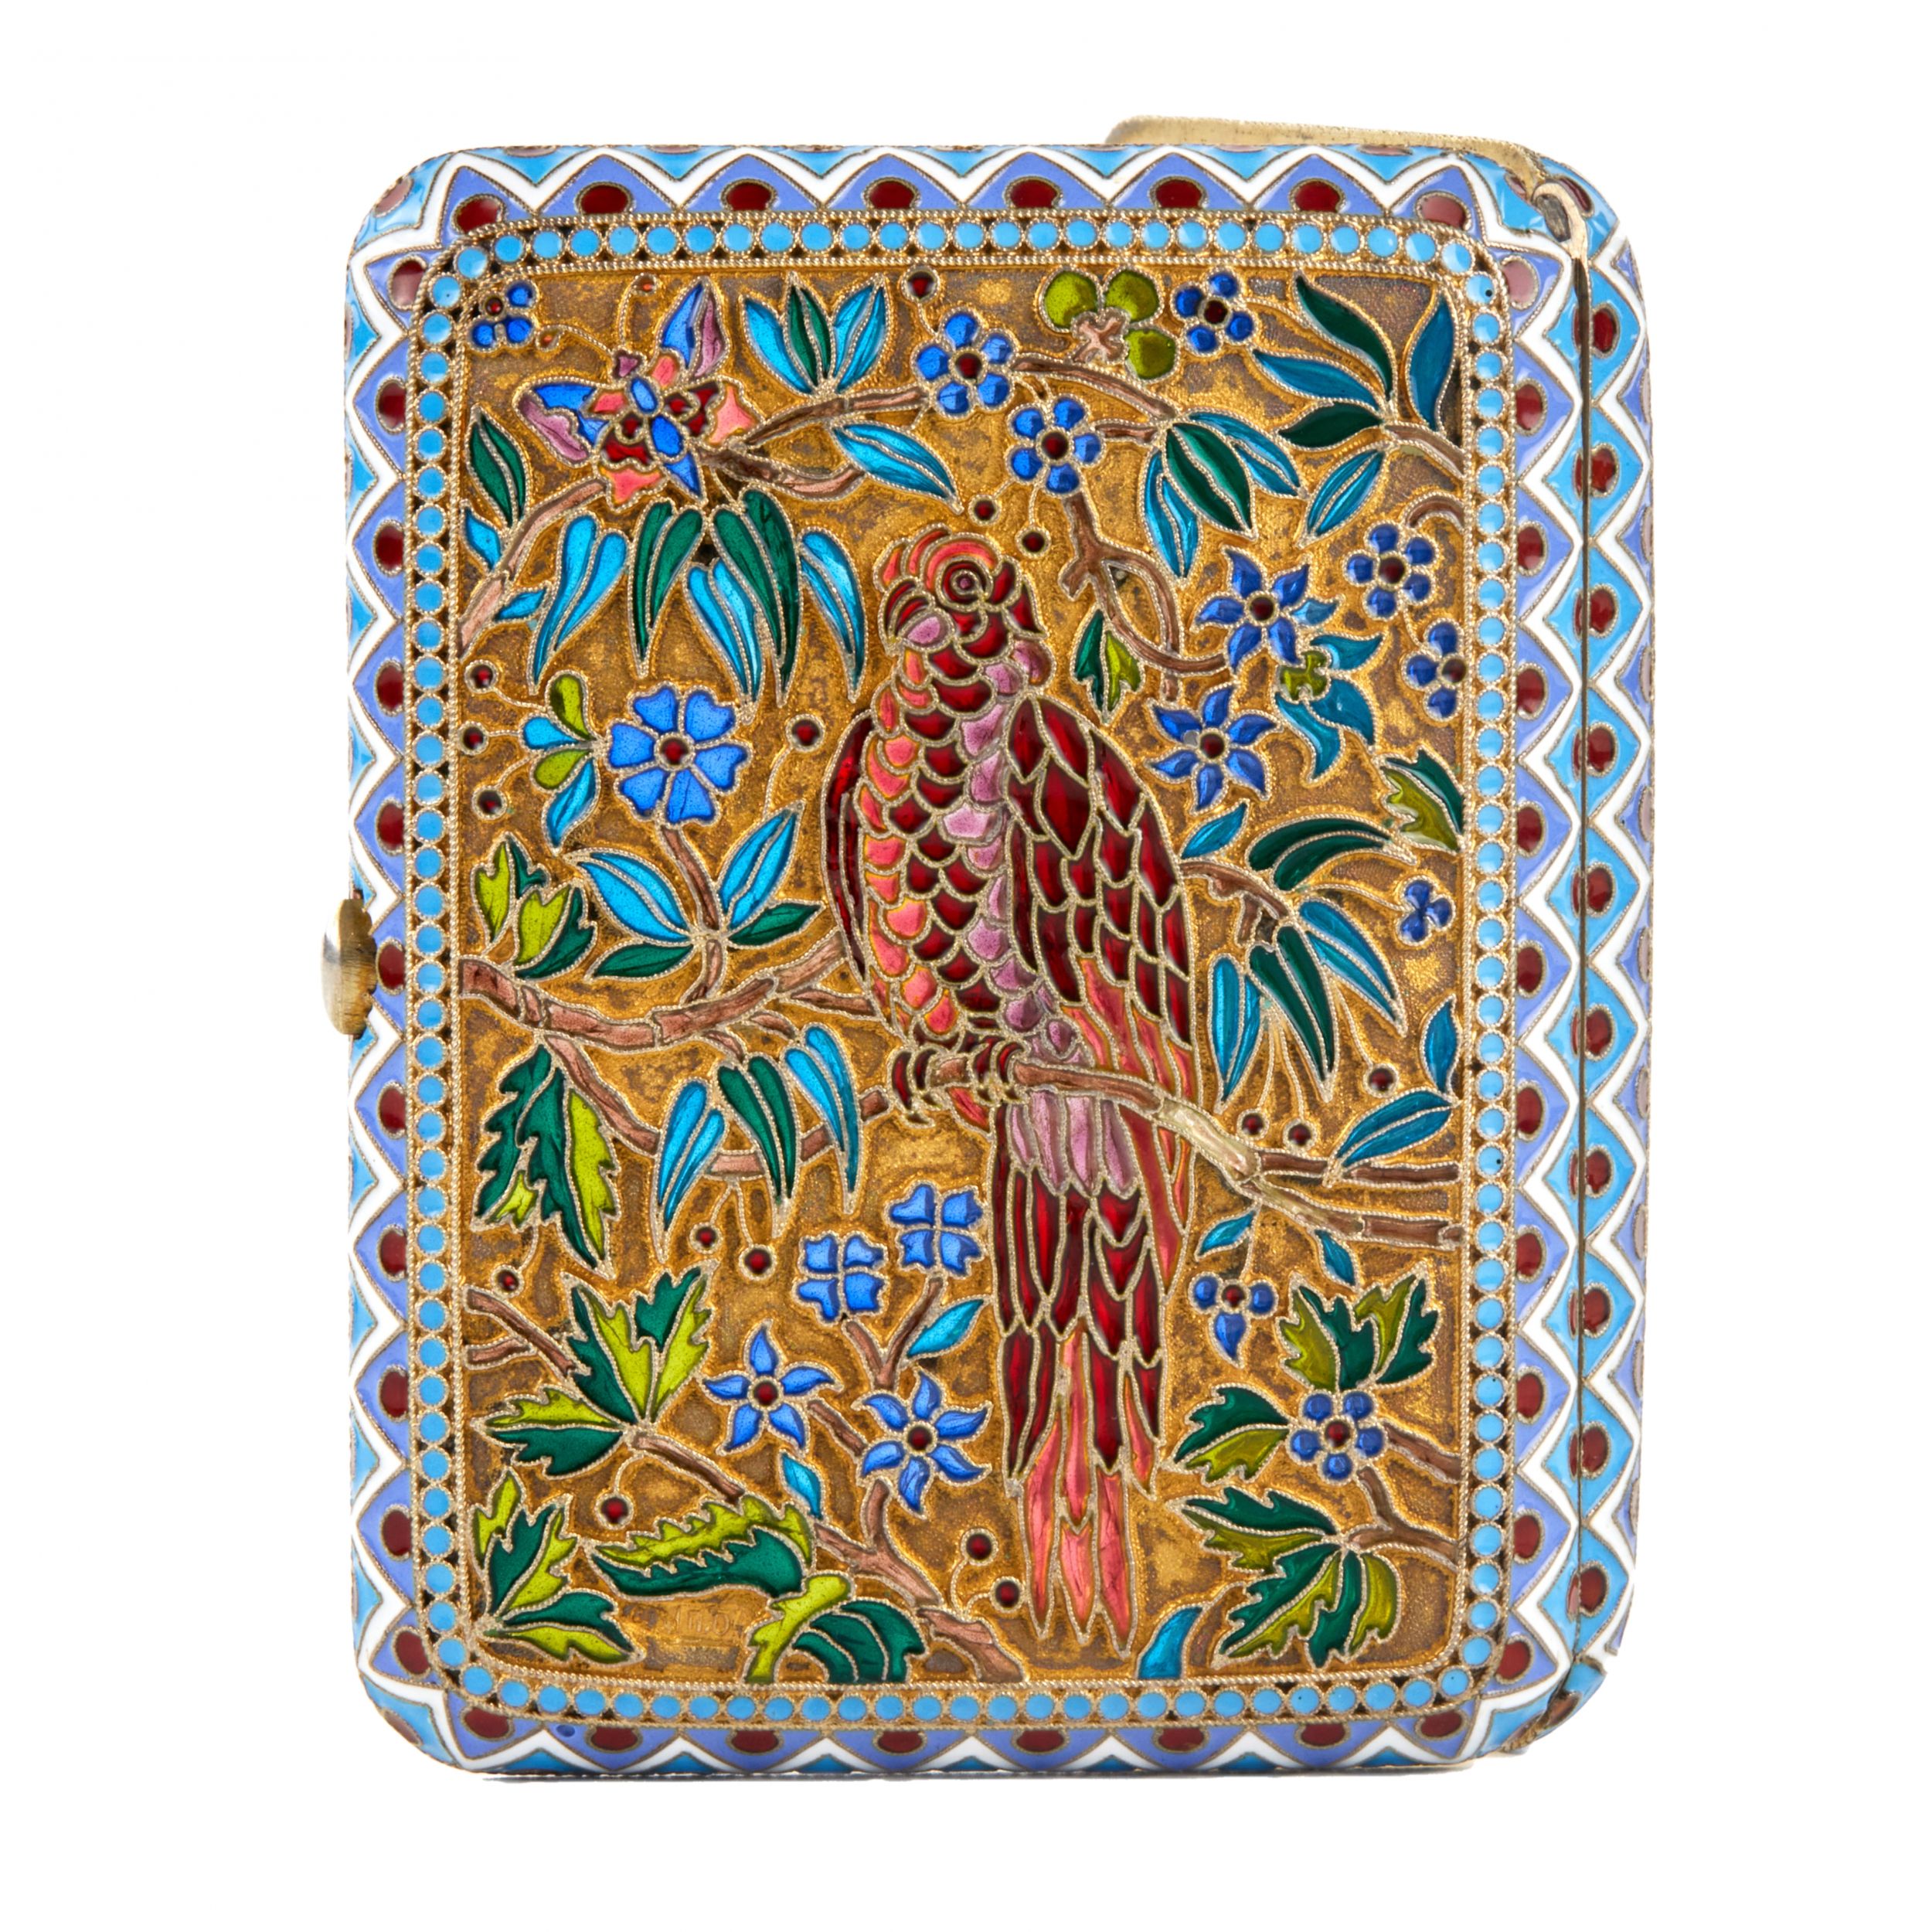 Silver cigarette case of Ovchinnikovs stained glass enamel. - Image 3 of 9